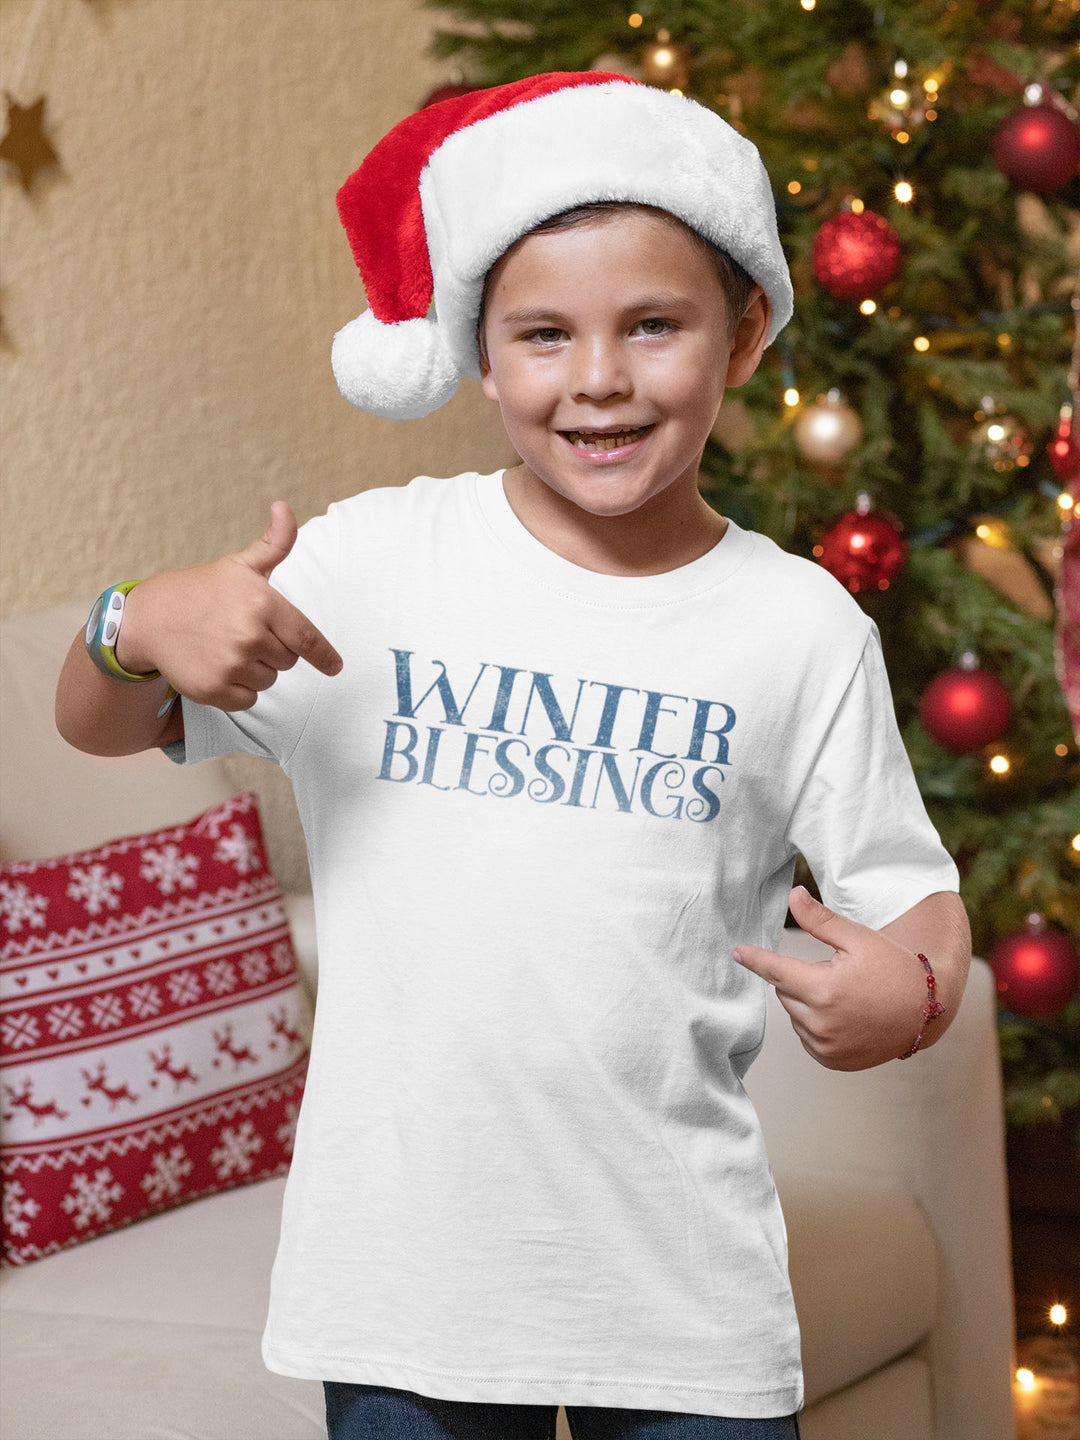 Winter Blessings. Short Sleeve T Shirts For Toddlers And Kids. - TeesForToddlersandKids -  t-shirt - christmas, holidays, seasons, winter - winter-blfssings-short-sleeve-t-shirts-for-toddlers-and-kids